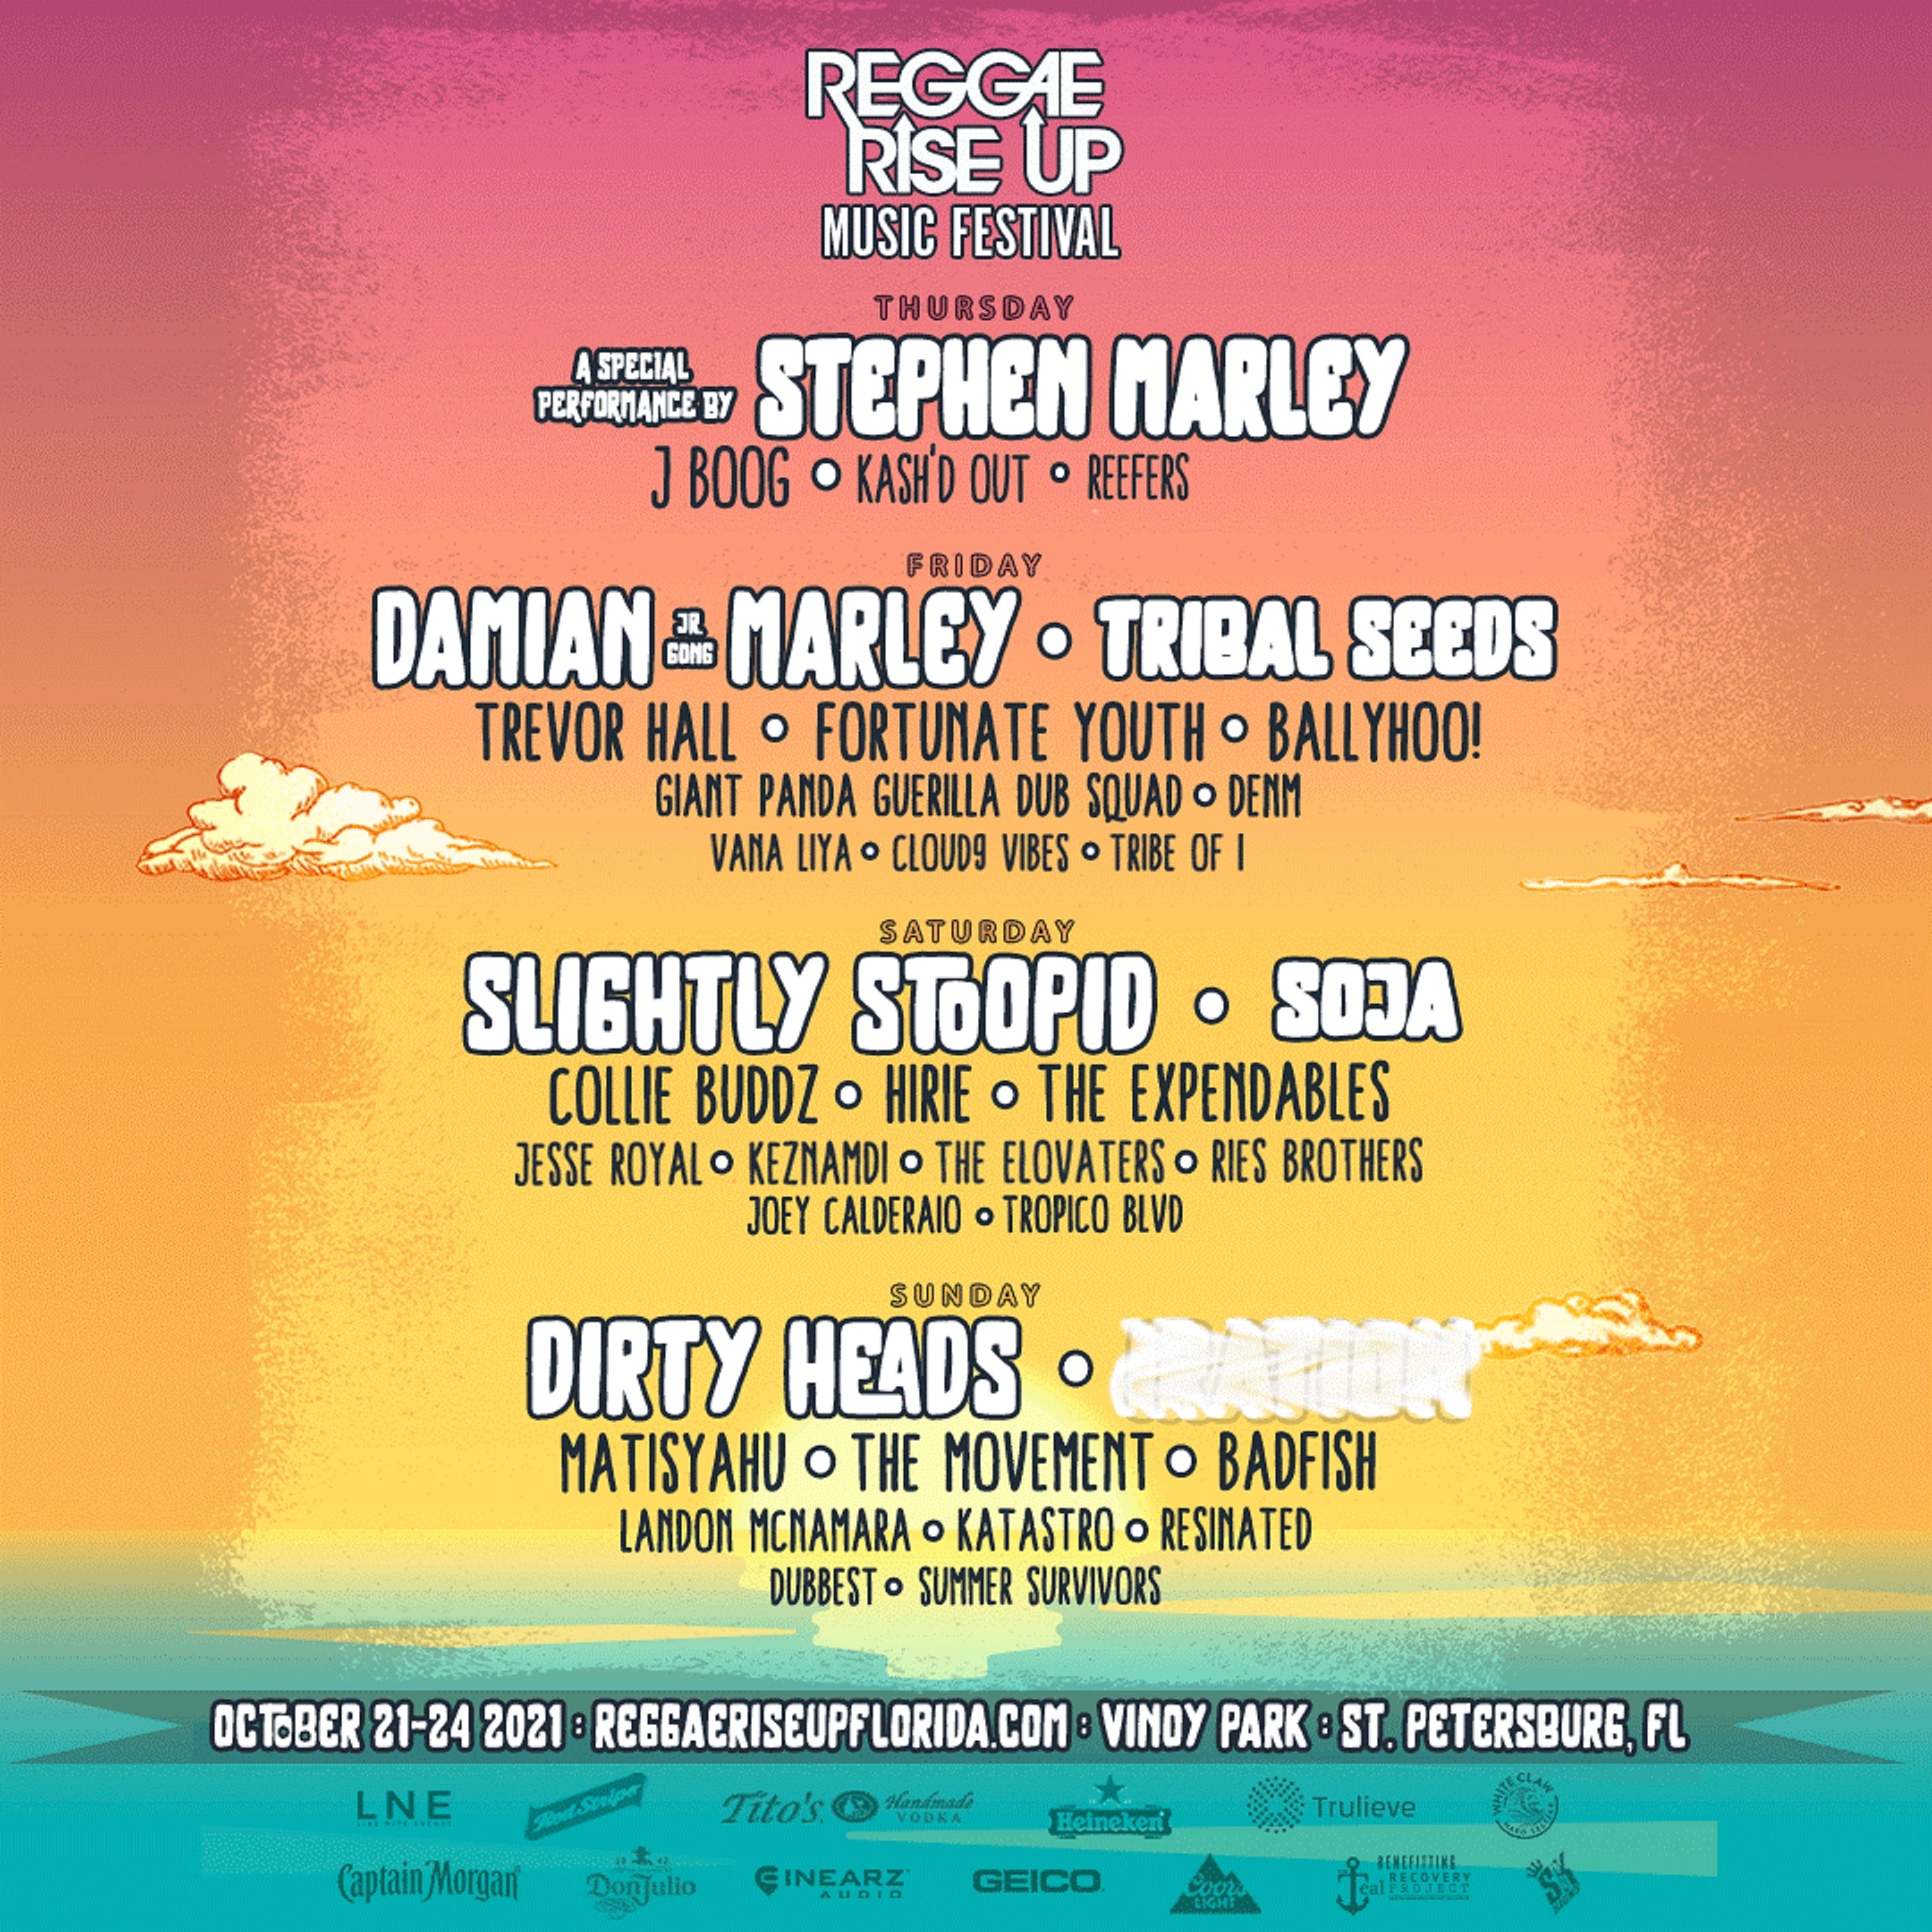 Reggae Rise Up Florida Announces Thursday Lineup Additions Featuring